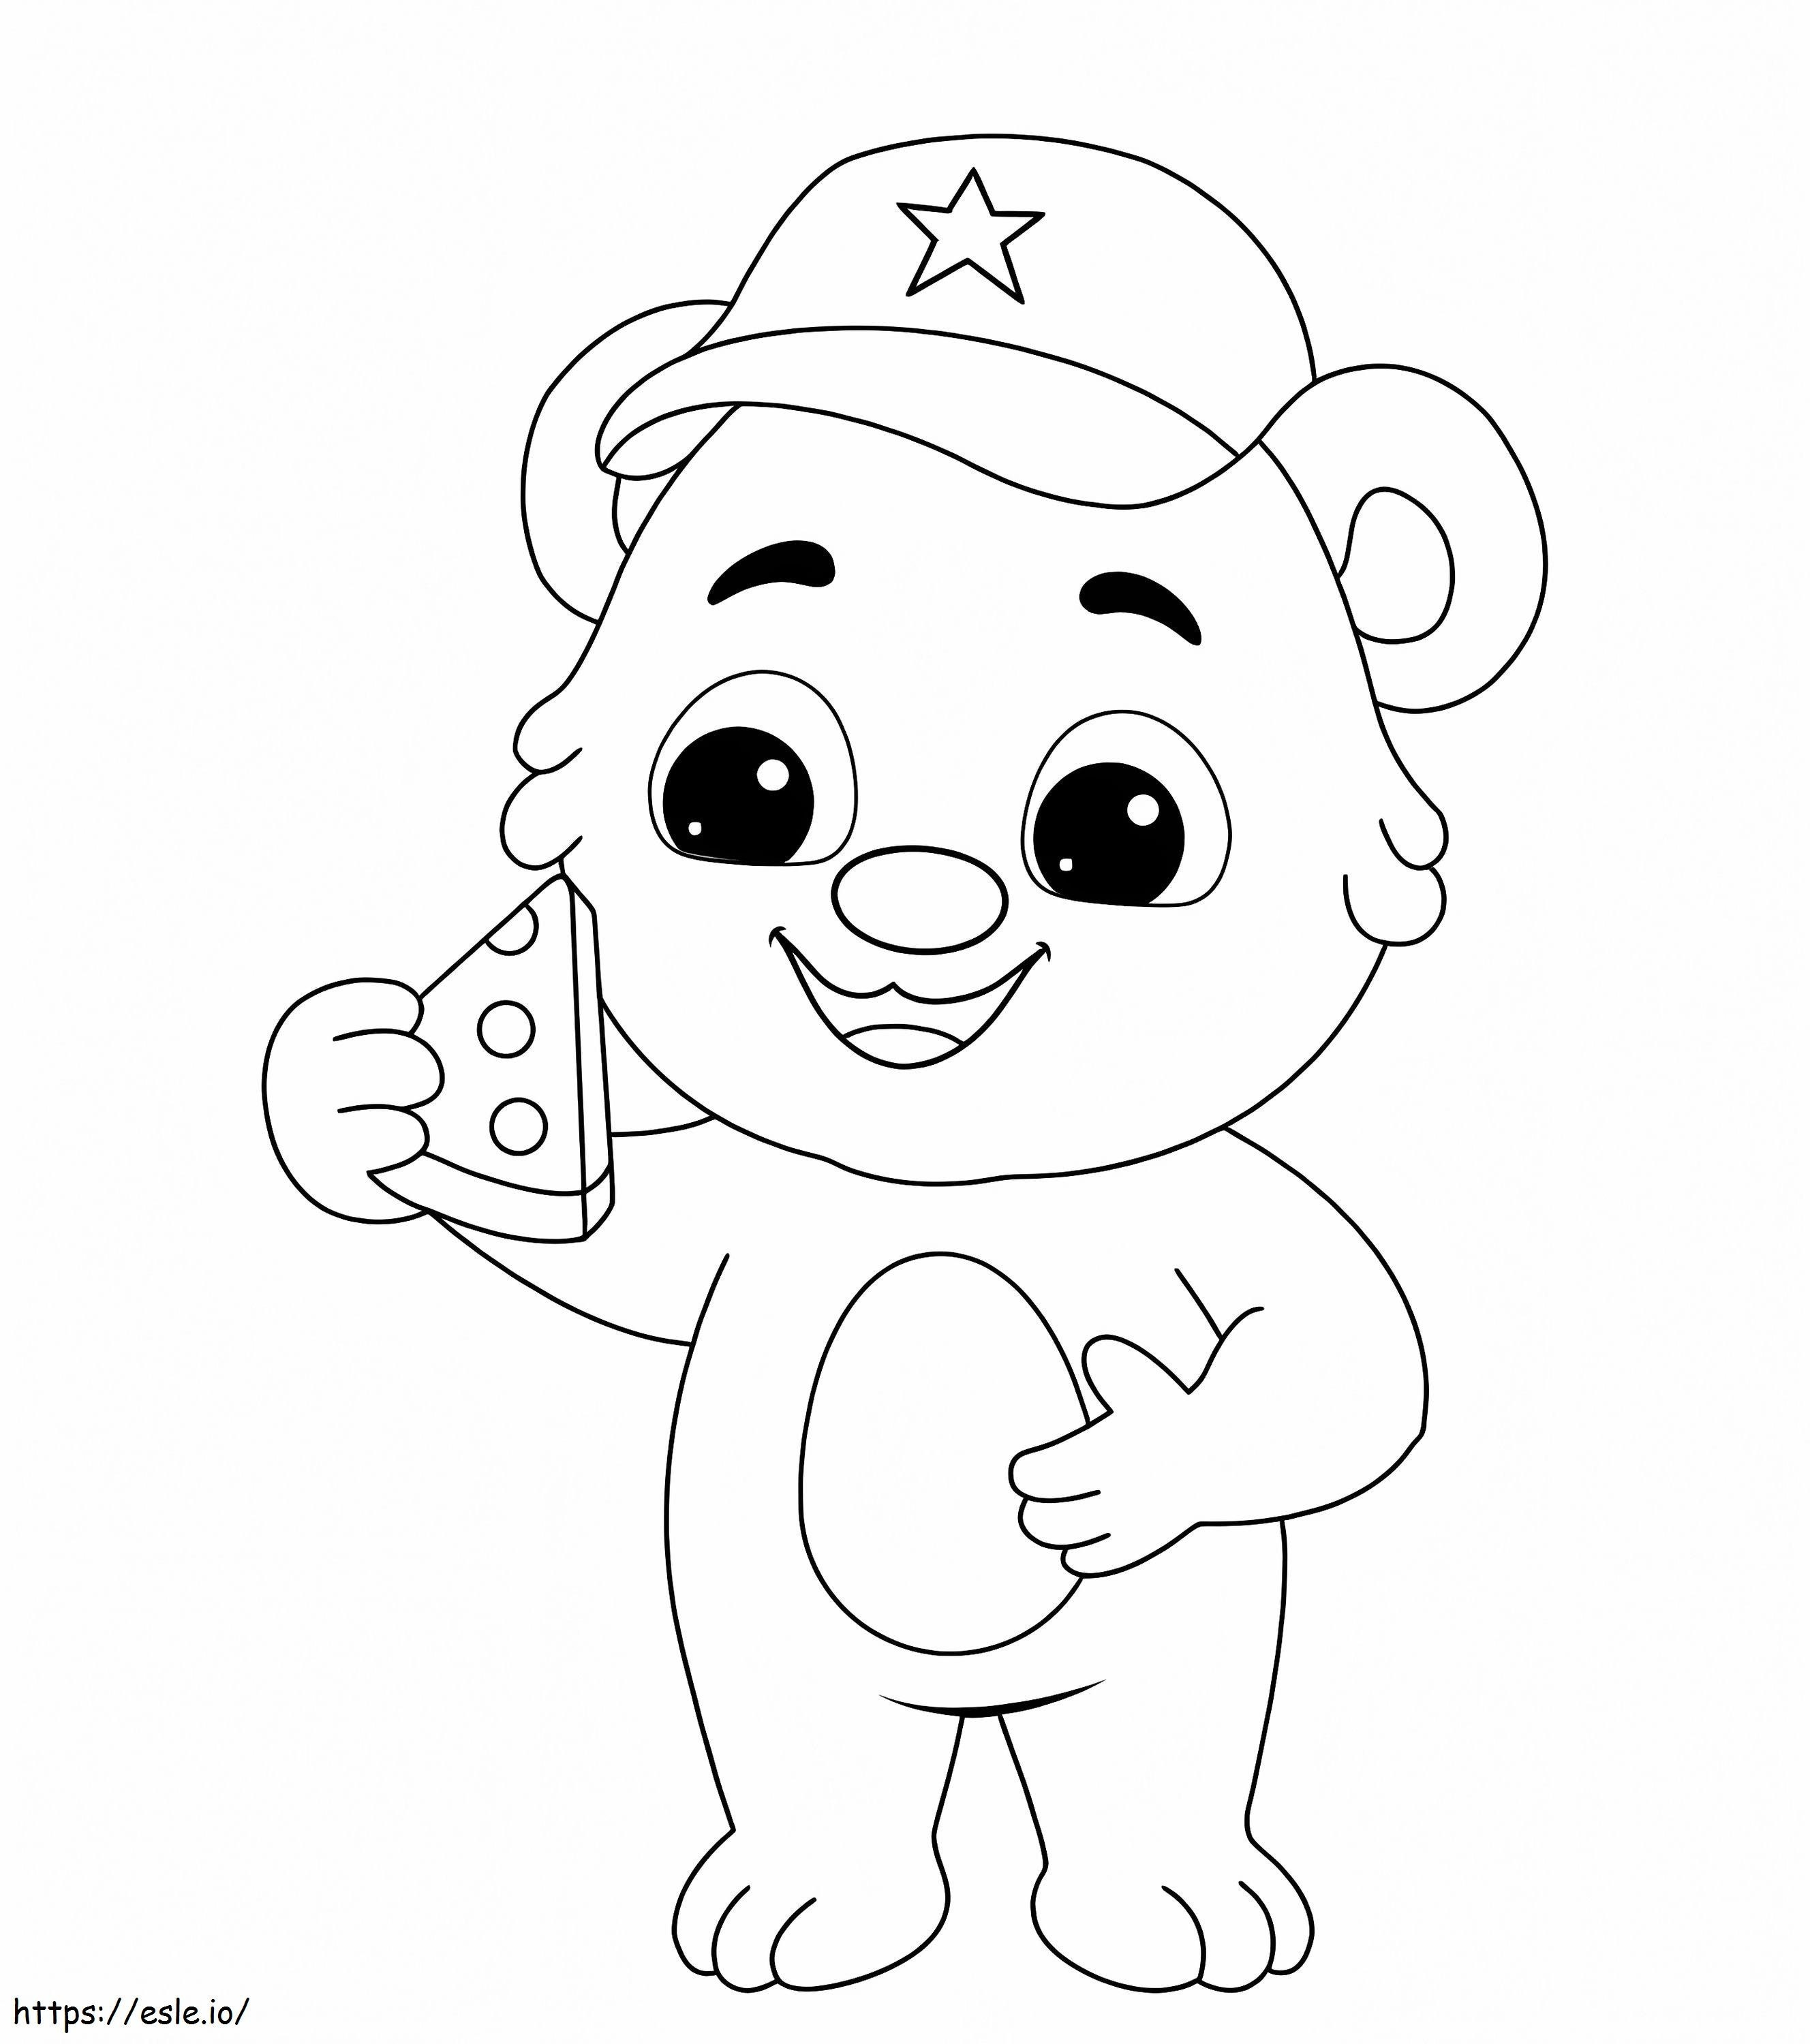 Pizza Holding Toy coloring page